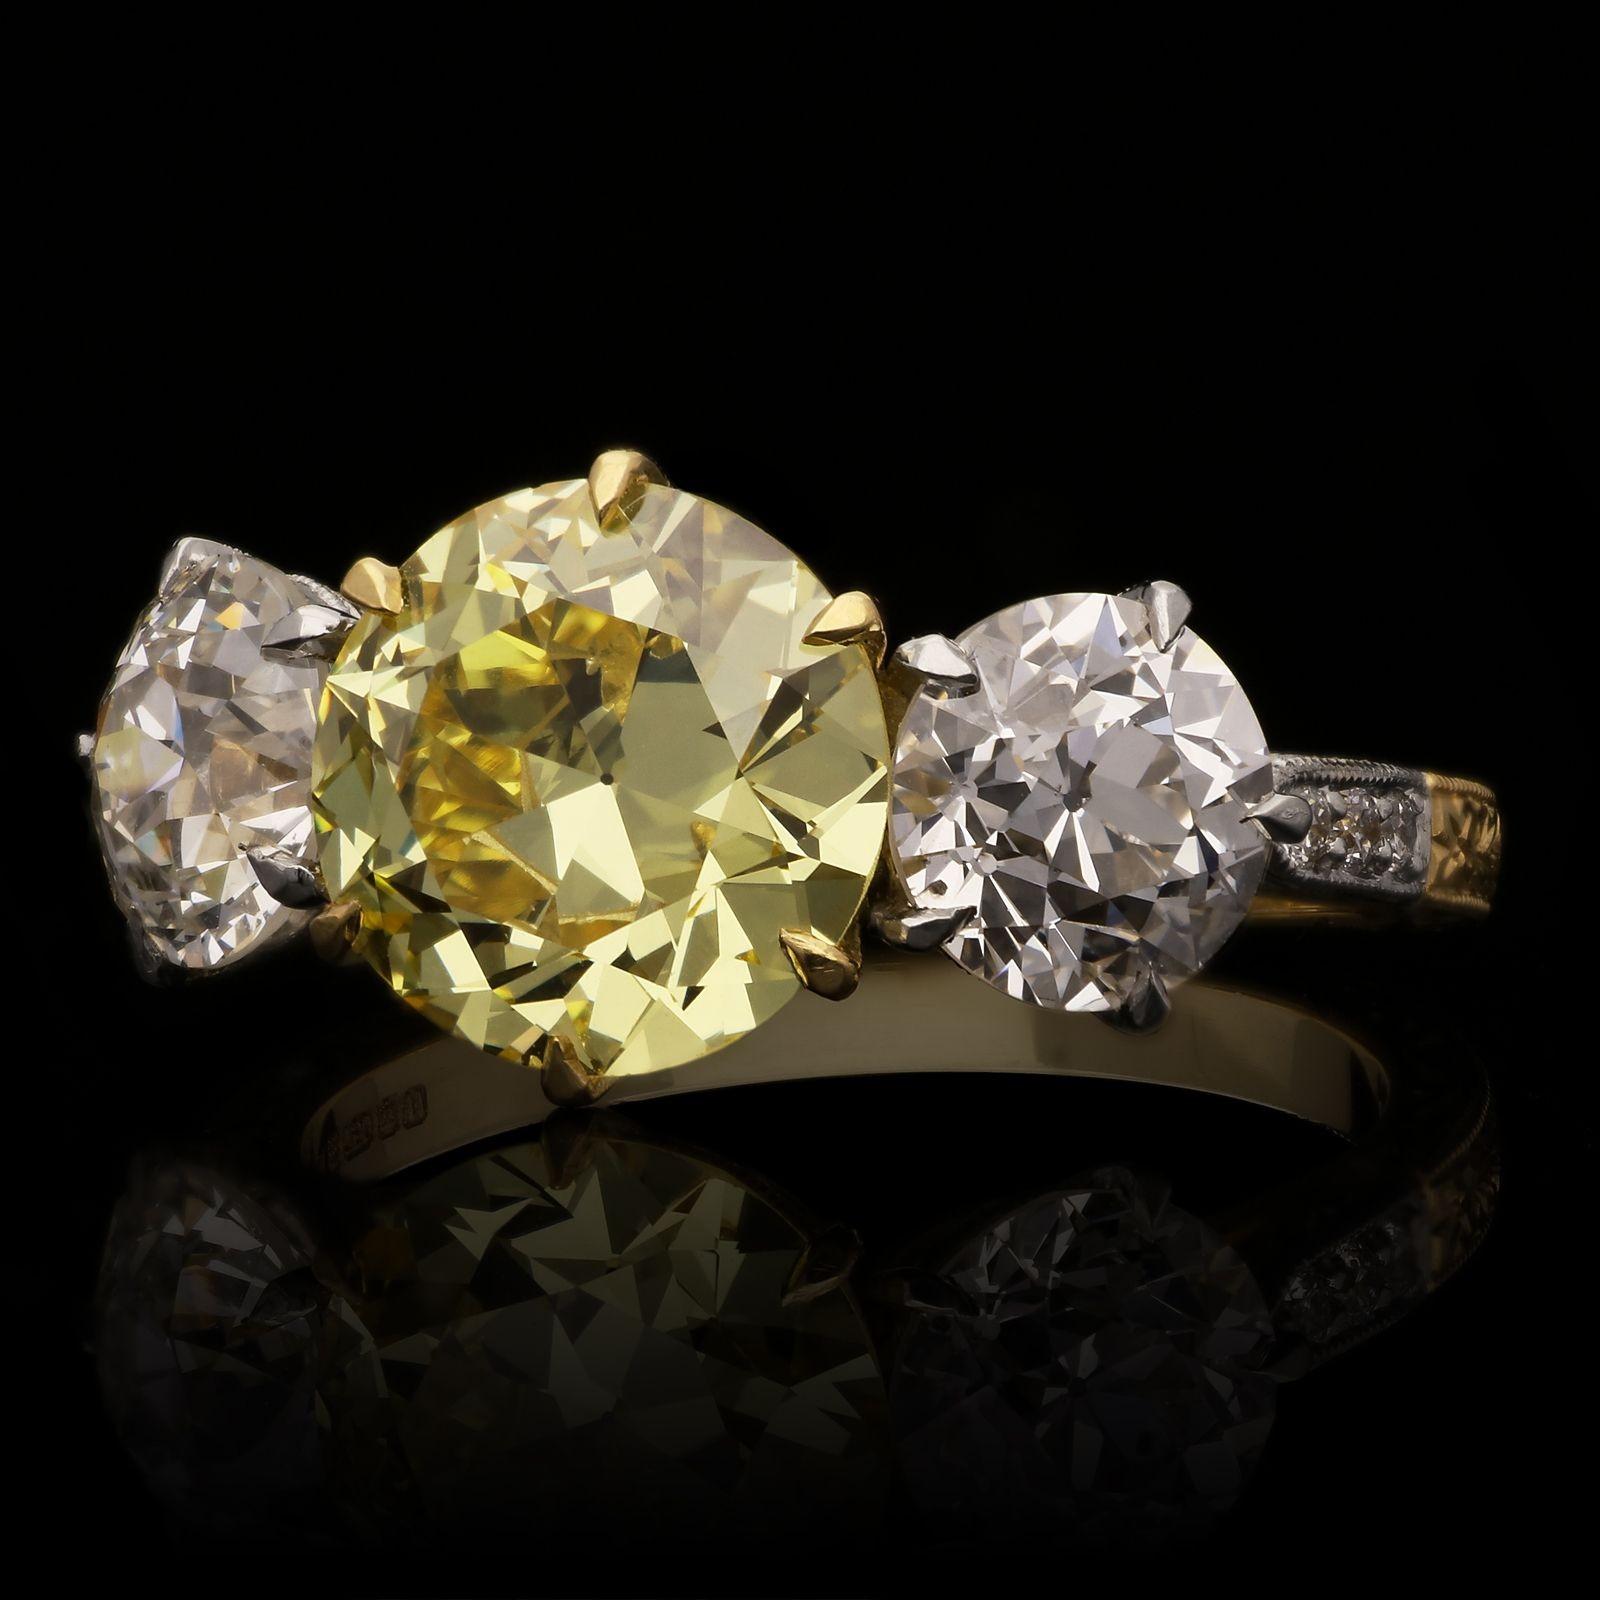 A beautiful old cut fancy coloured diamond and white diamond three stone ring by Hancocks, centred with a wonderful old European brilliant cut diamond weighing 2.41cts and of Fancy Intense Yellow colour and VS1 clarity, claw set in 18ct yellow gold